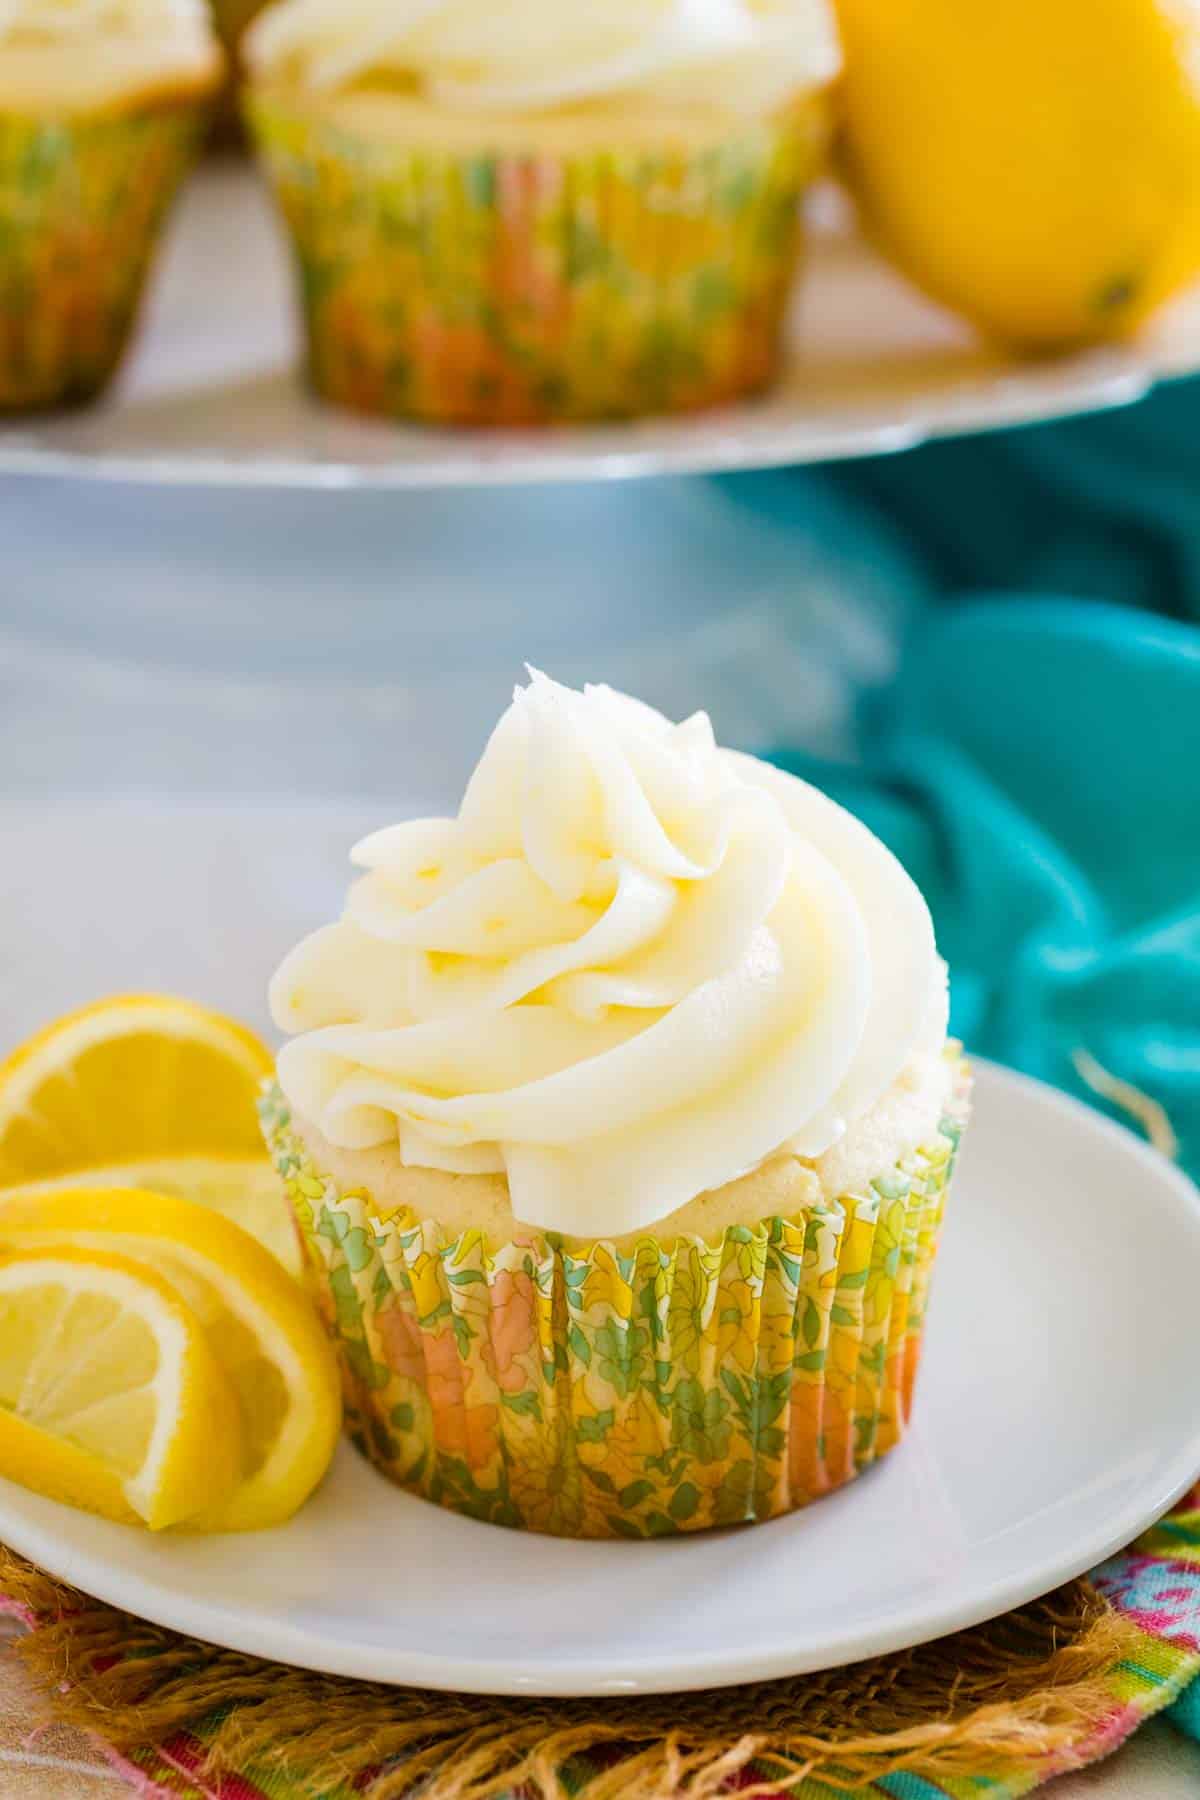 A frosted gluten-free lemon cupcake on a white plate next to lemon slices, with more cupcakes on a cupcake stand in the background.